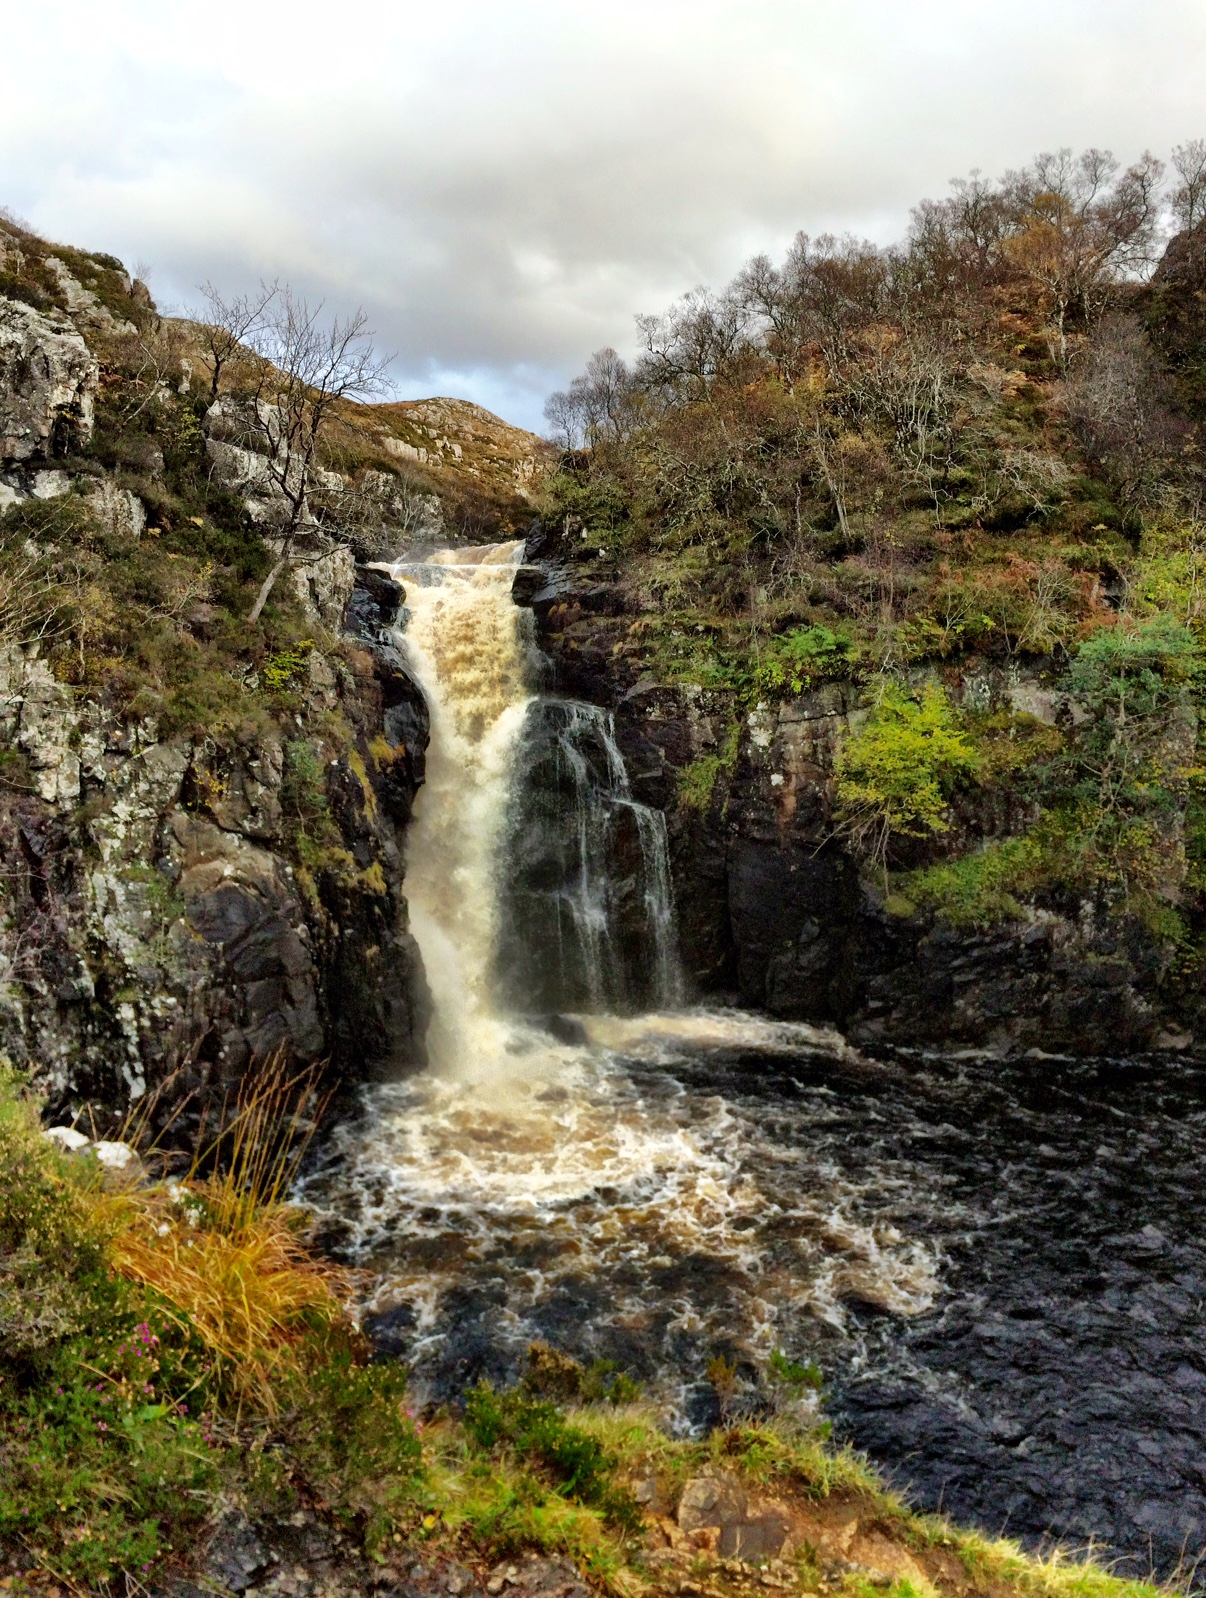 The Falls of Kirkaig and the Hills of the Assynt